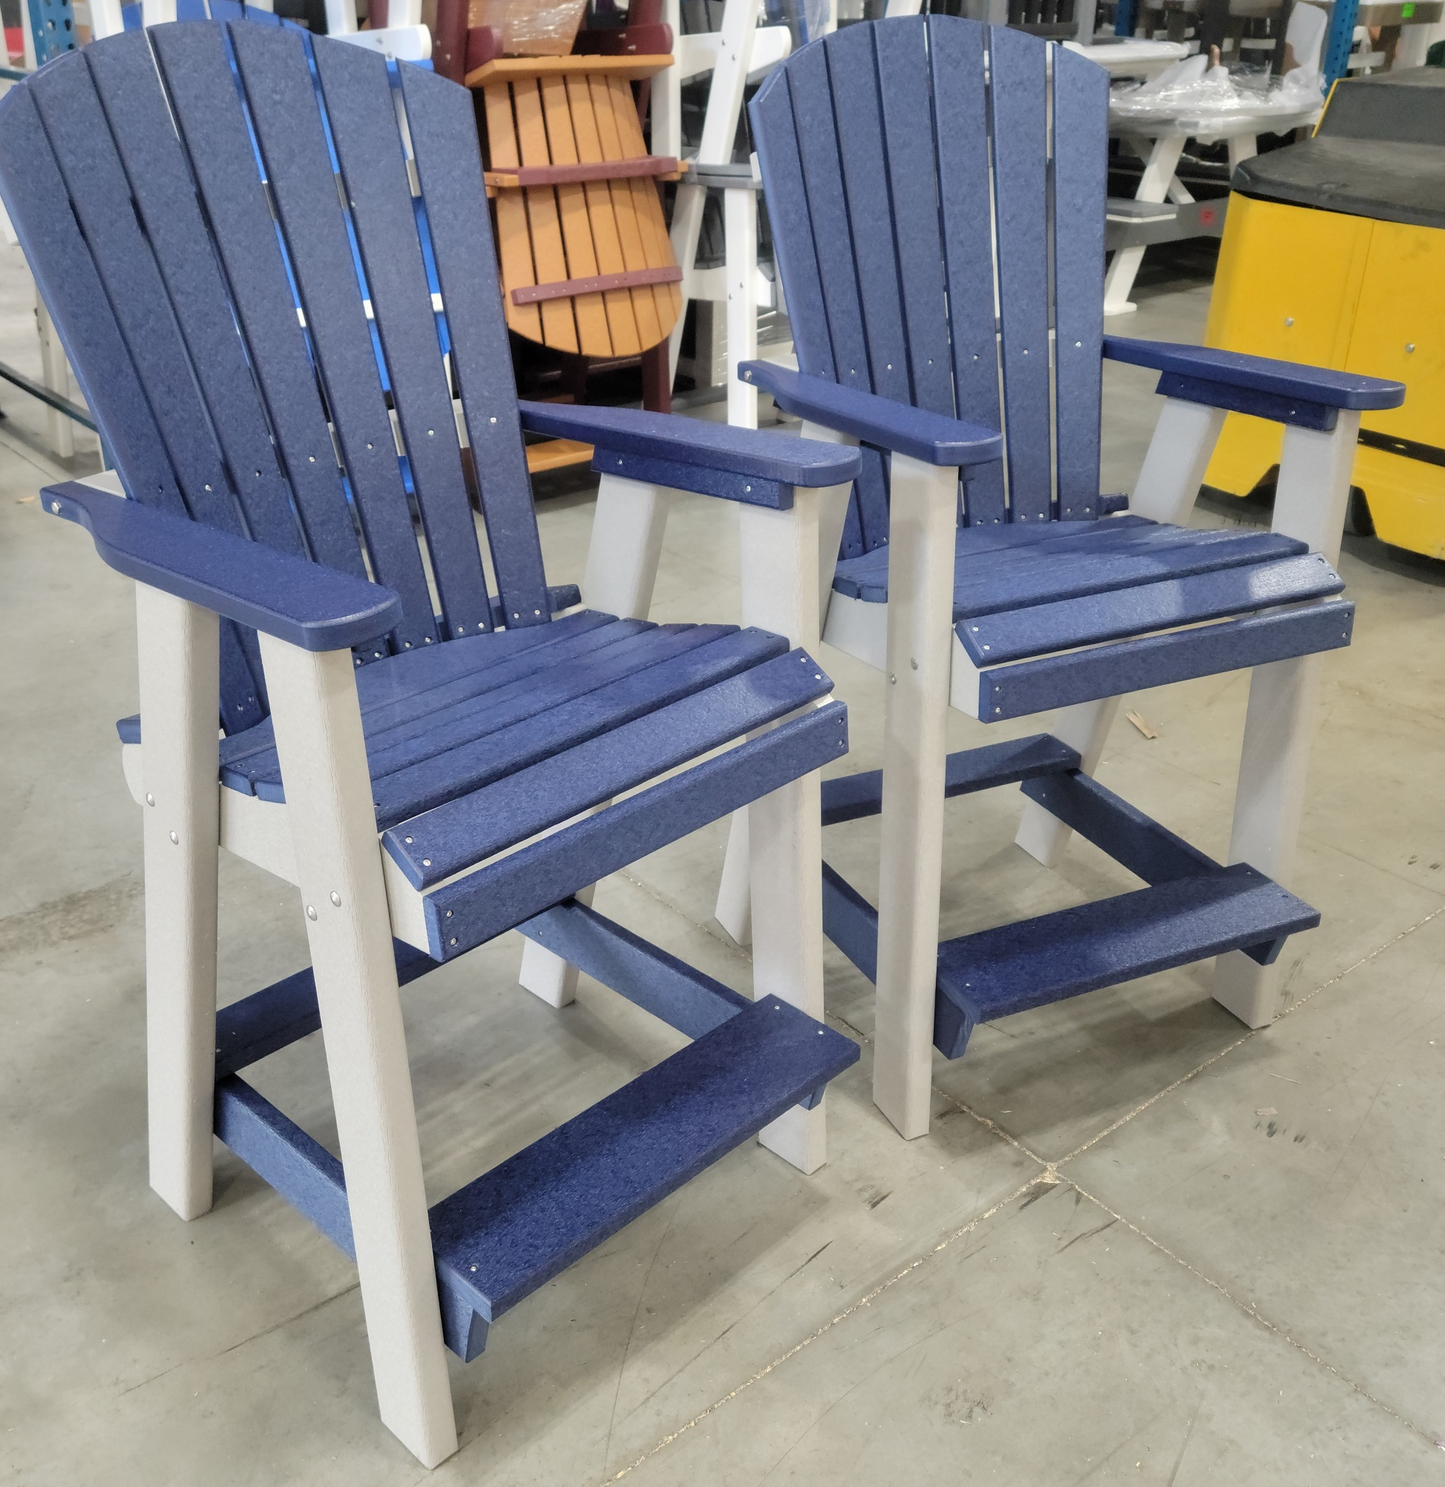 Leisure Lawns Amish Made Recycled Plastic Balcony Chair (Counter Height) Model #321C - LEAD TIME TO SHIP 4 WEEKS OR LESS